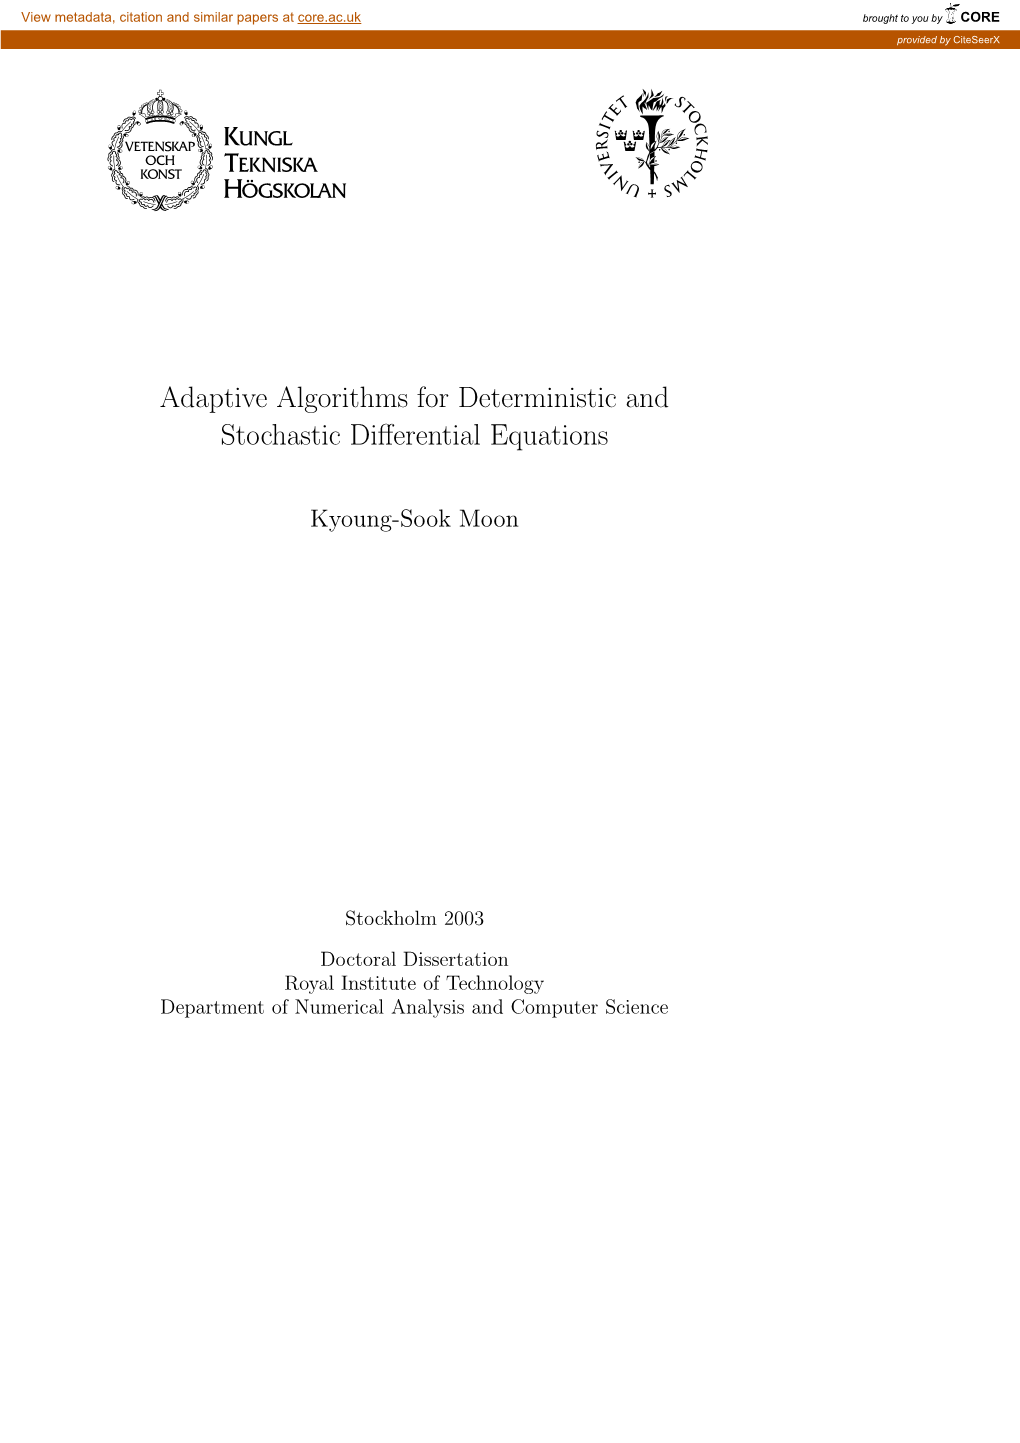 Adaptive Algorithms for Deterministic and Stochastic Differential Equations